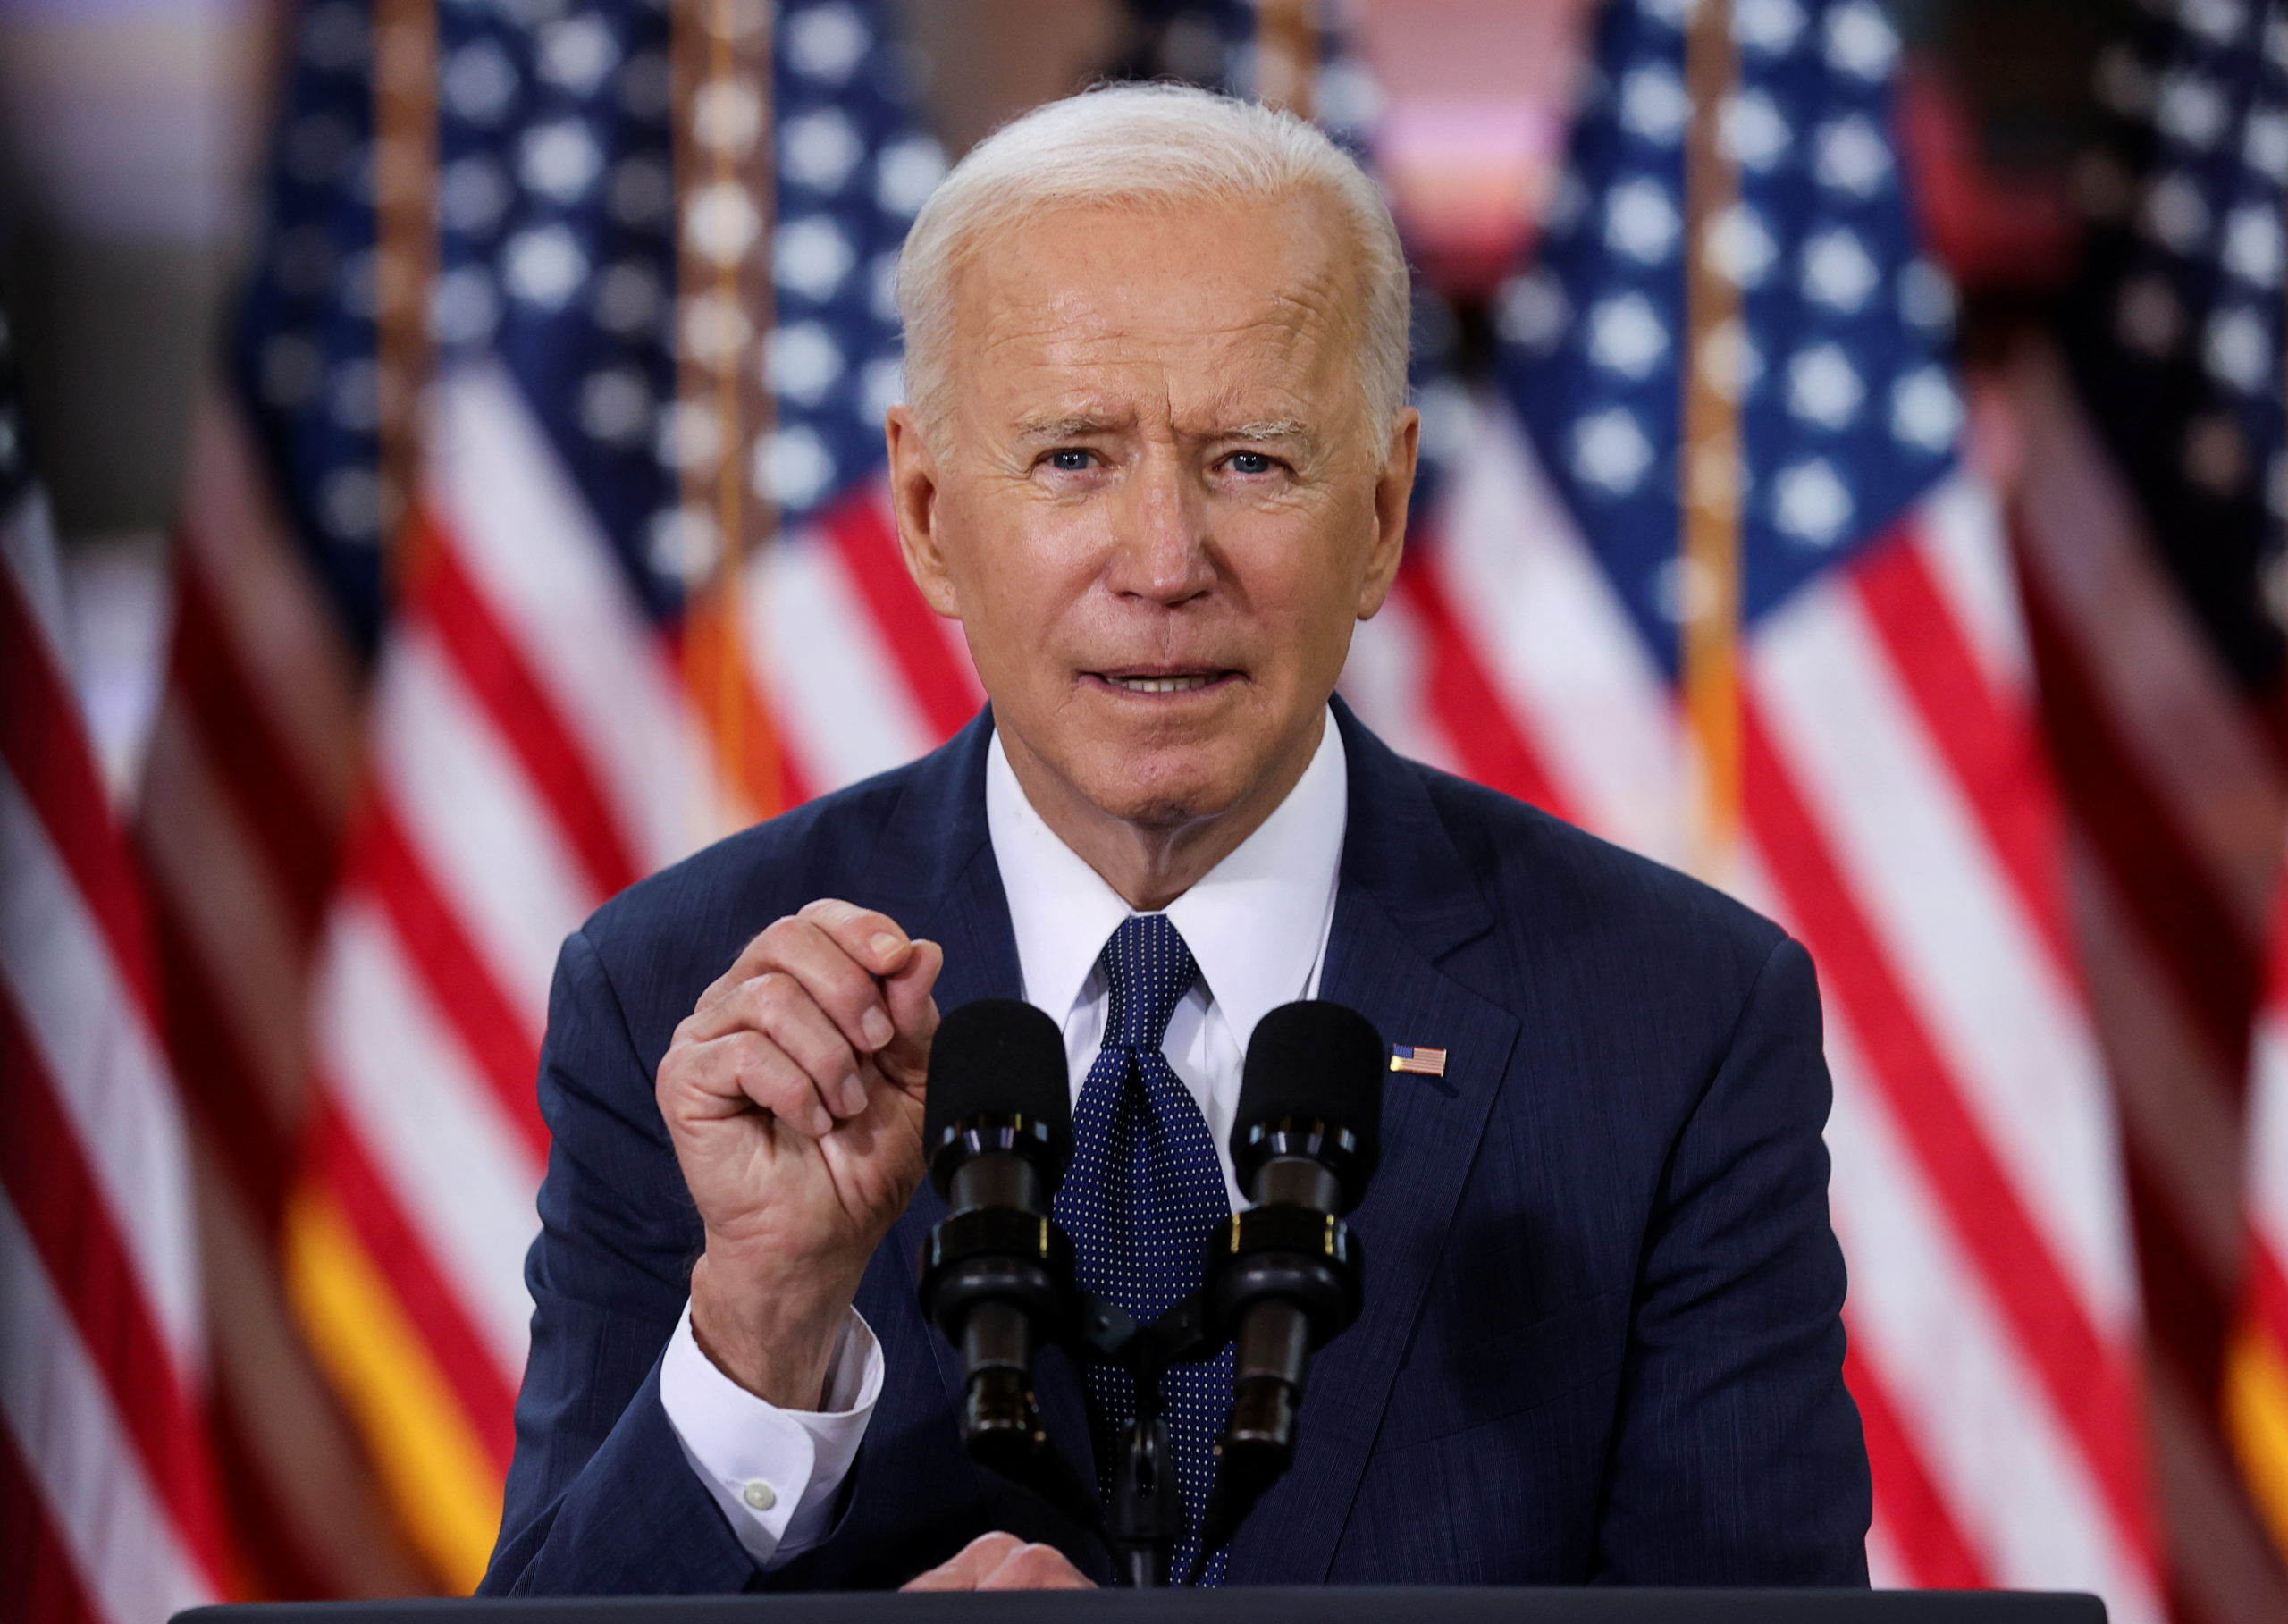 Tired Of Waiting For Republicans To Do the Right Thing, Biden Announces Executive Action To Expand Gun Control